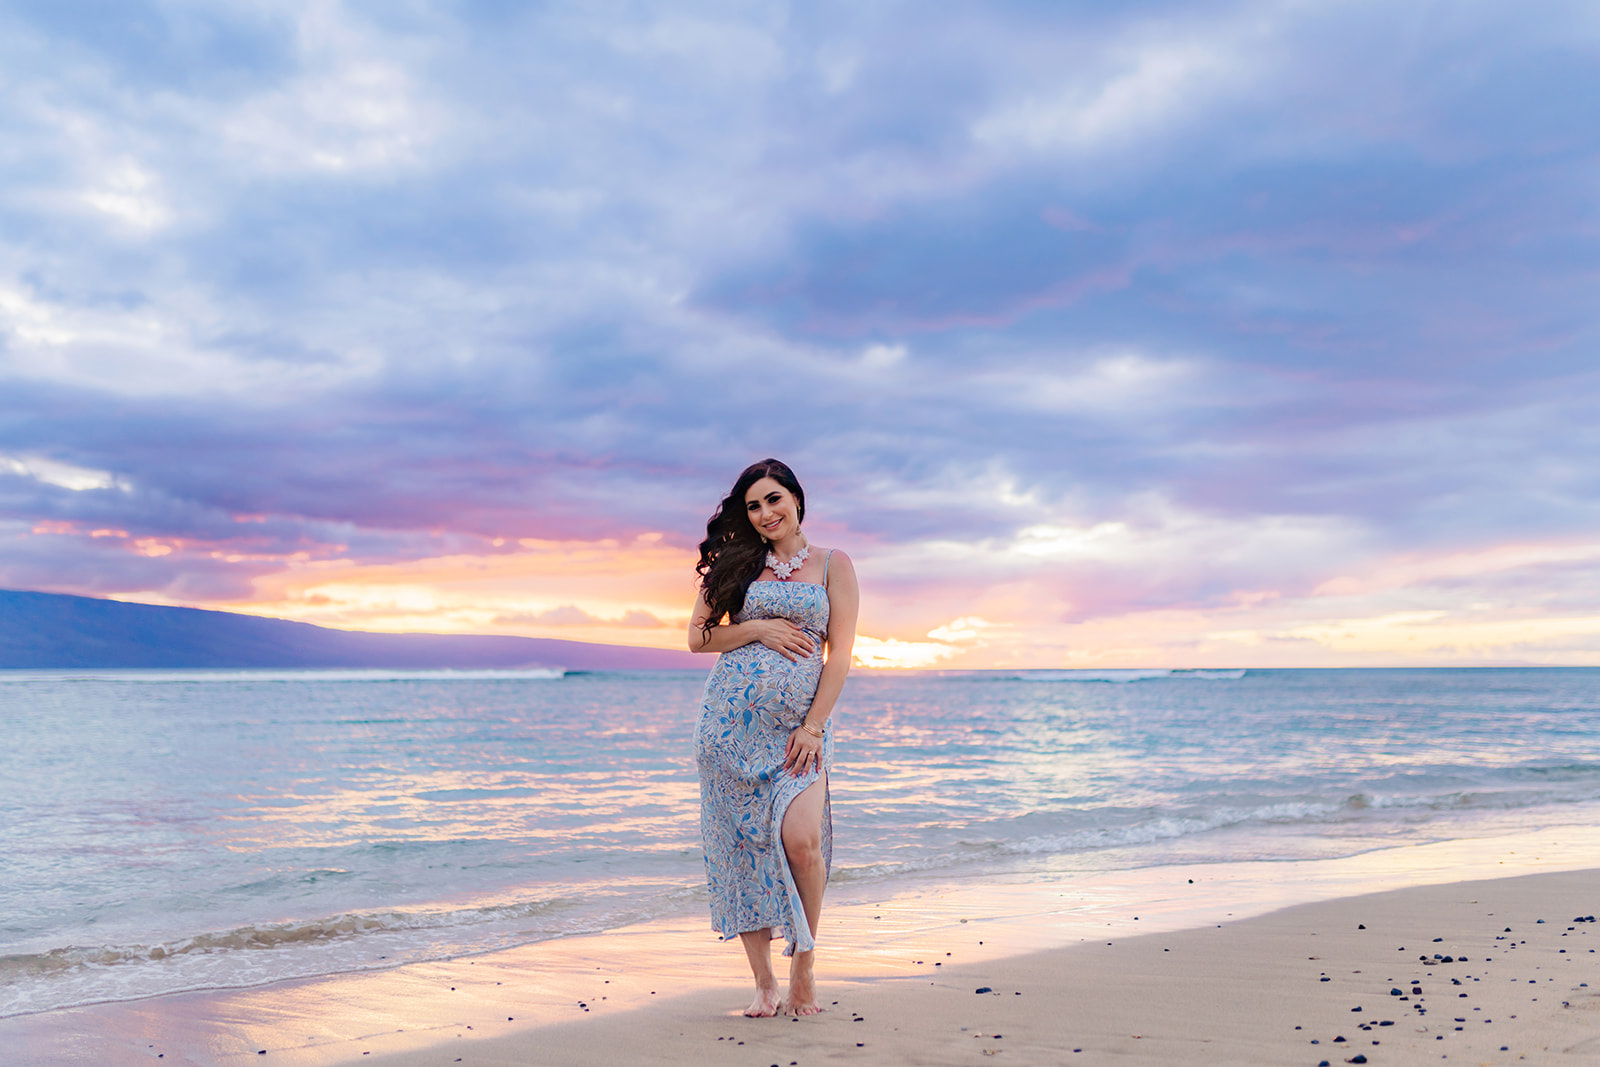 Long-haired brunette woman wearing a chunky necklace and blue and white  dress poses on the beach at sunset